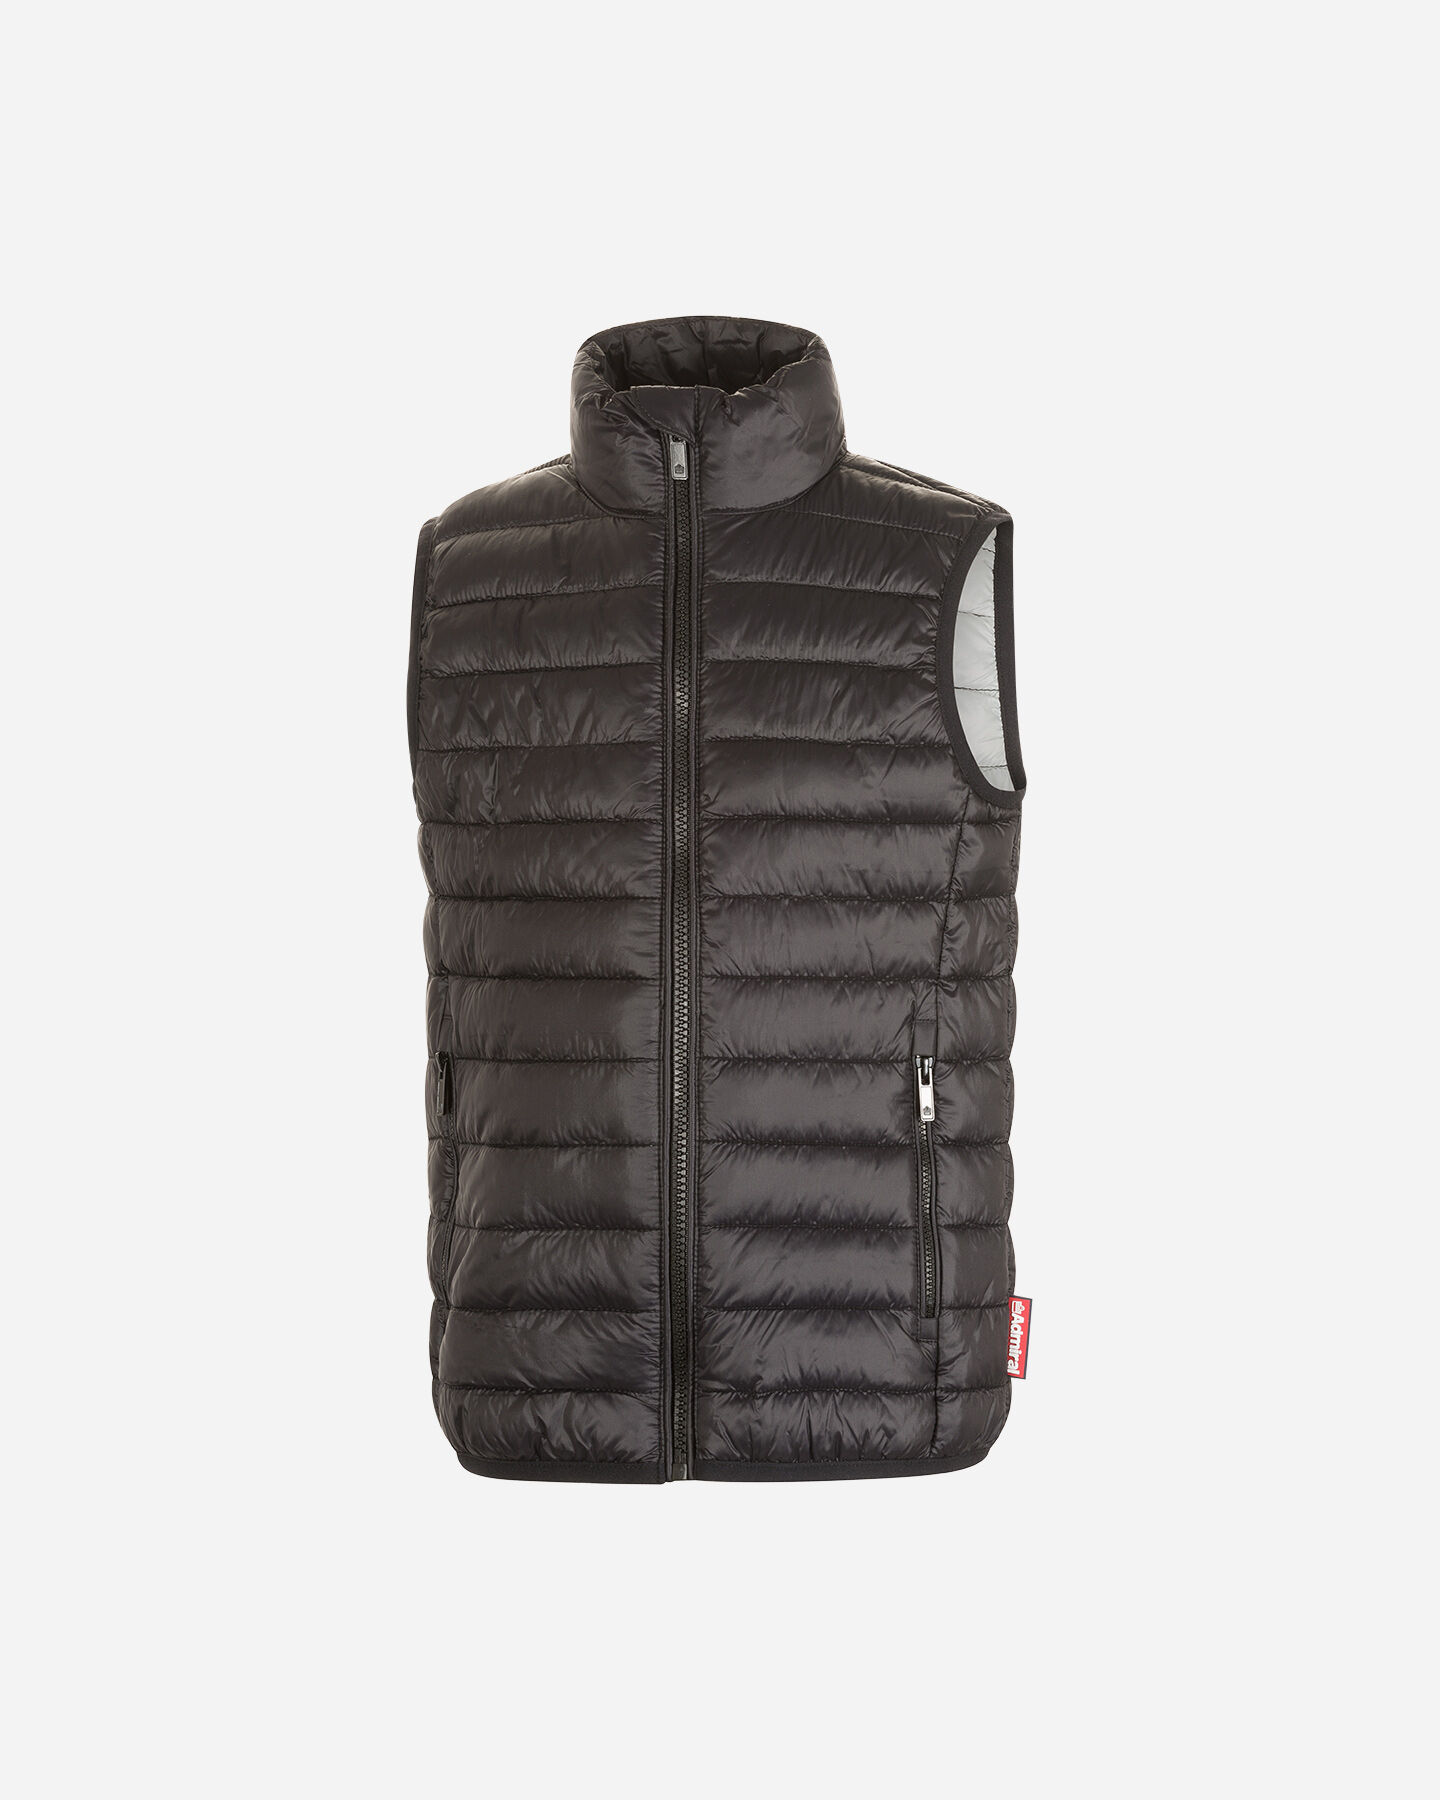  Gilet ADMIRAL ULTRALIGHT JR S4086977|050|4A scatto 0